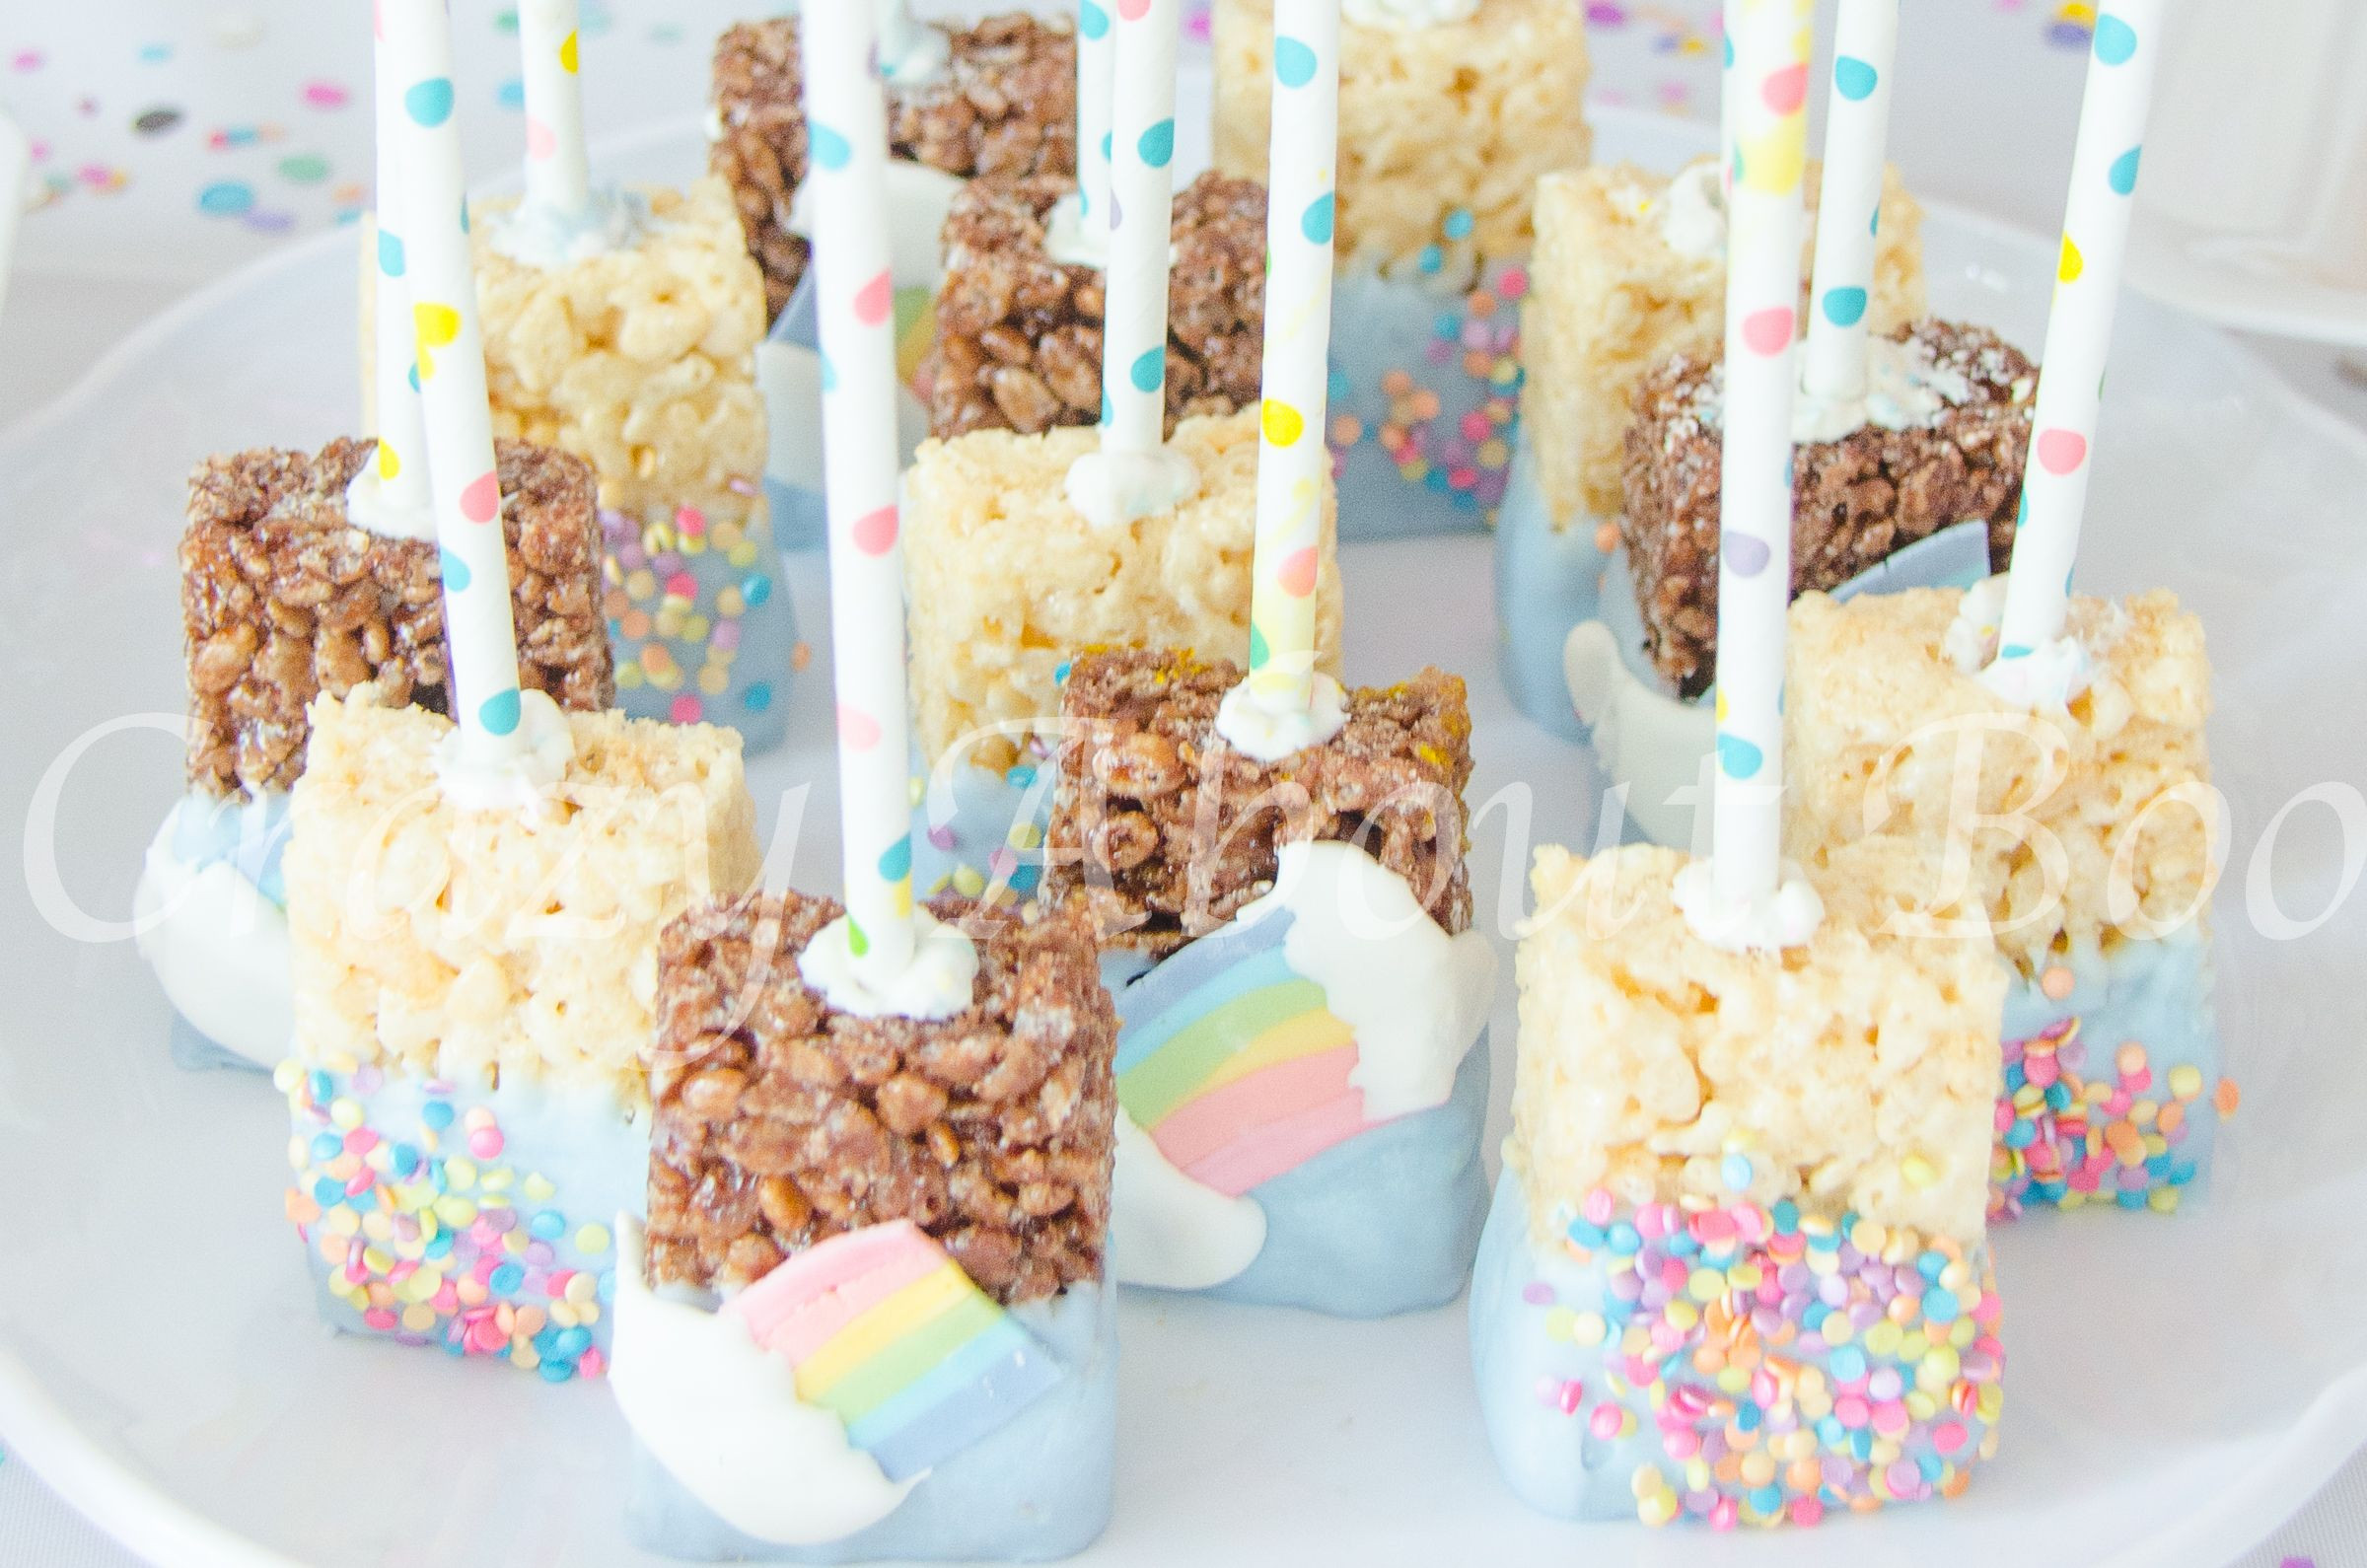 Unicorn Party Food Ideas Pony Tails
 Unicorn Birthday Ideas and Outfits